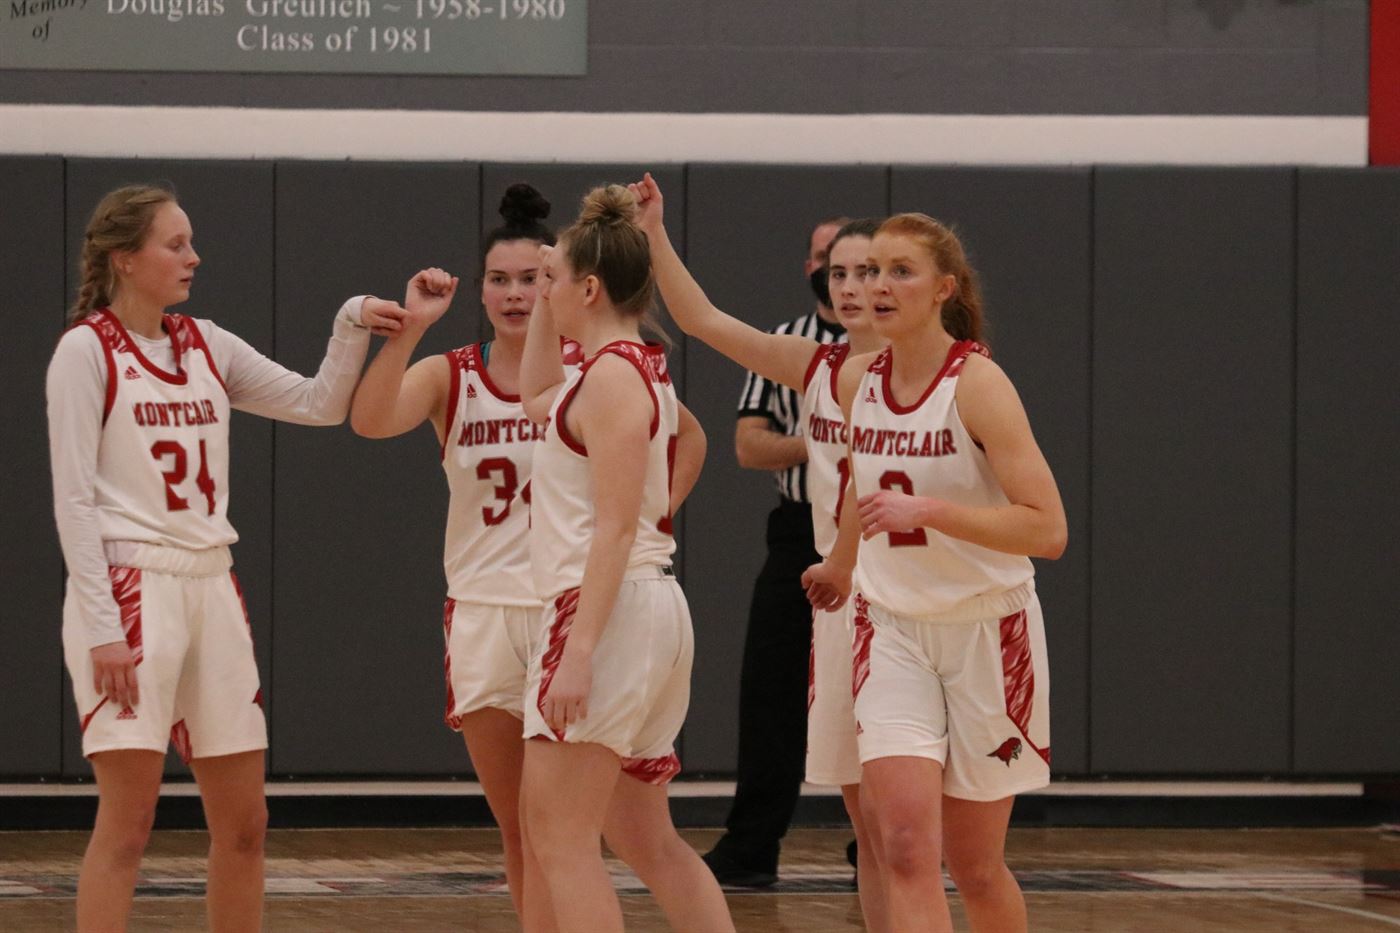 The Montclair State women's basketball team players come together to celebrate a play during the NJAC quarterfinals against Rutgers-Camden on March 5. Photo courtesy of Julia Radley